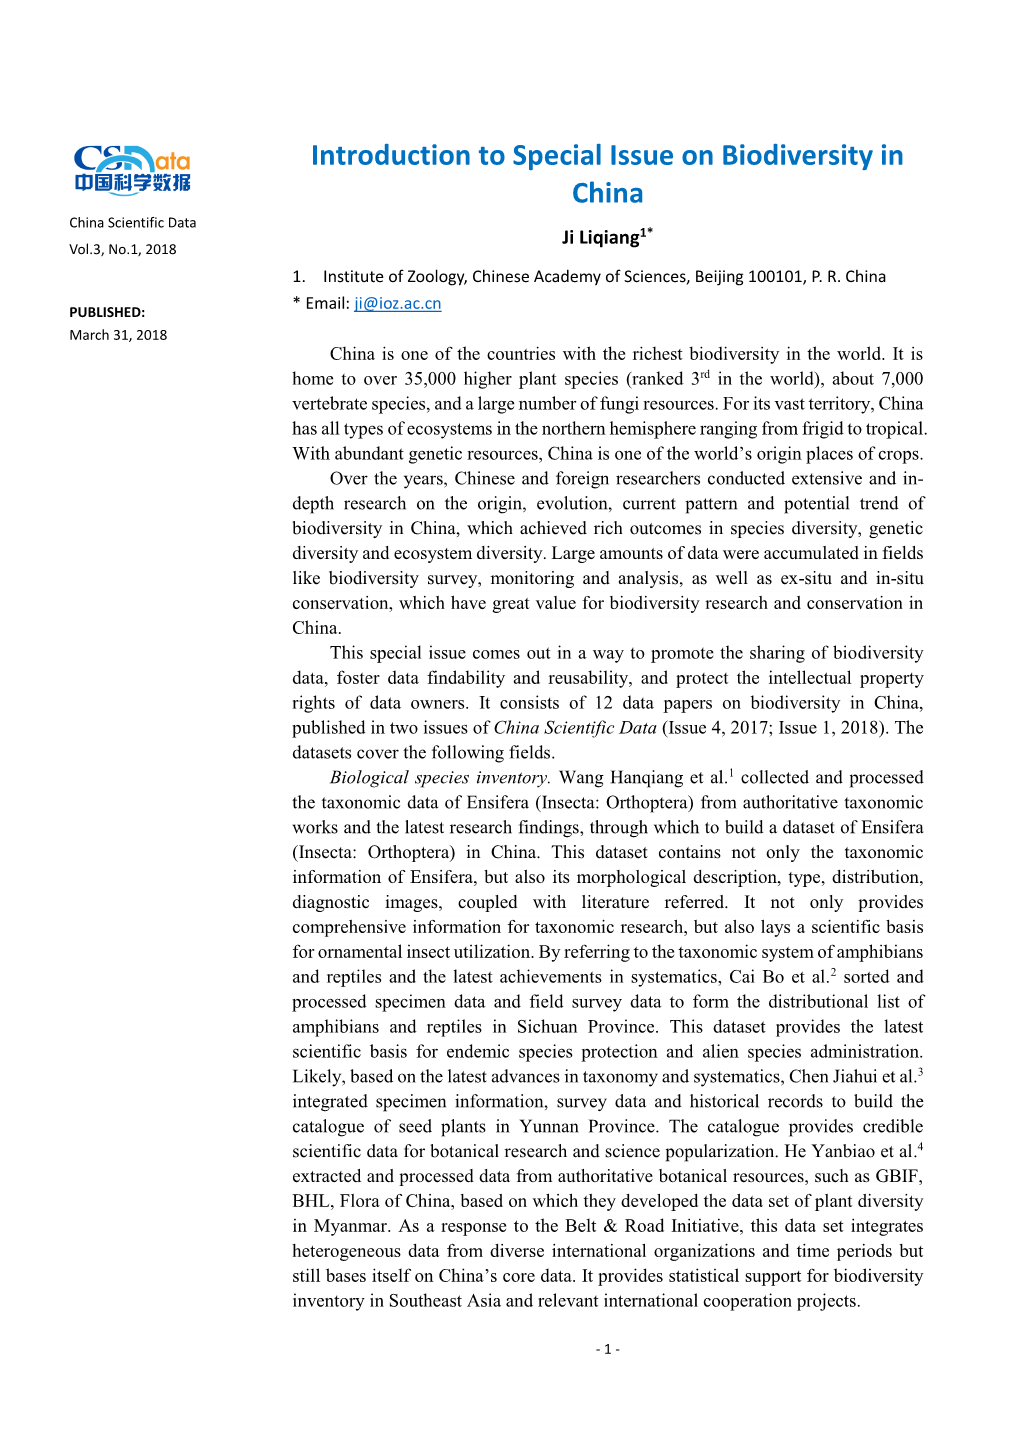 Introduction to Special Issue on Biodiversity in China